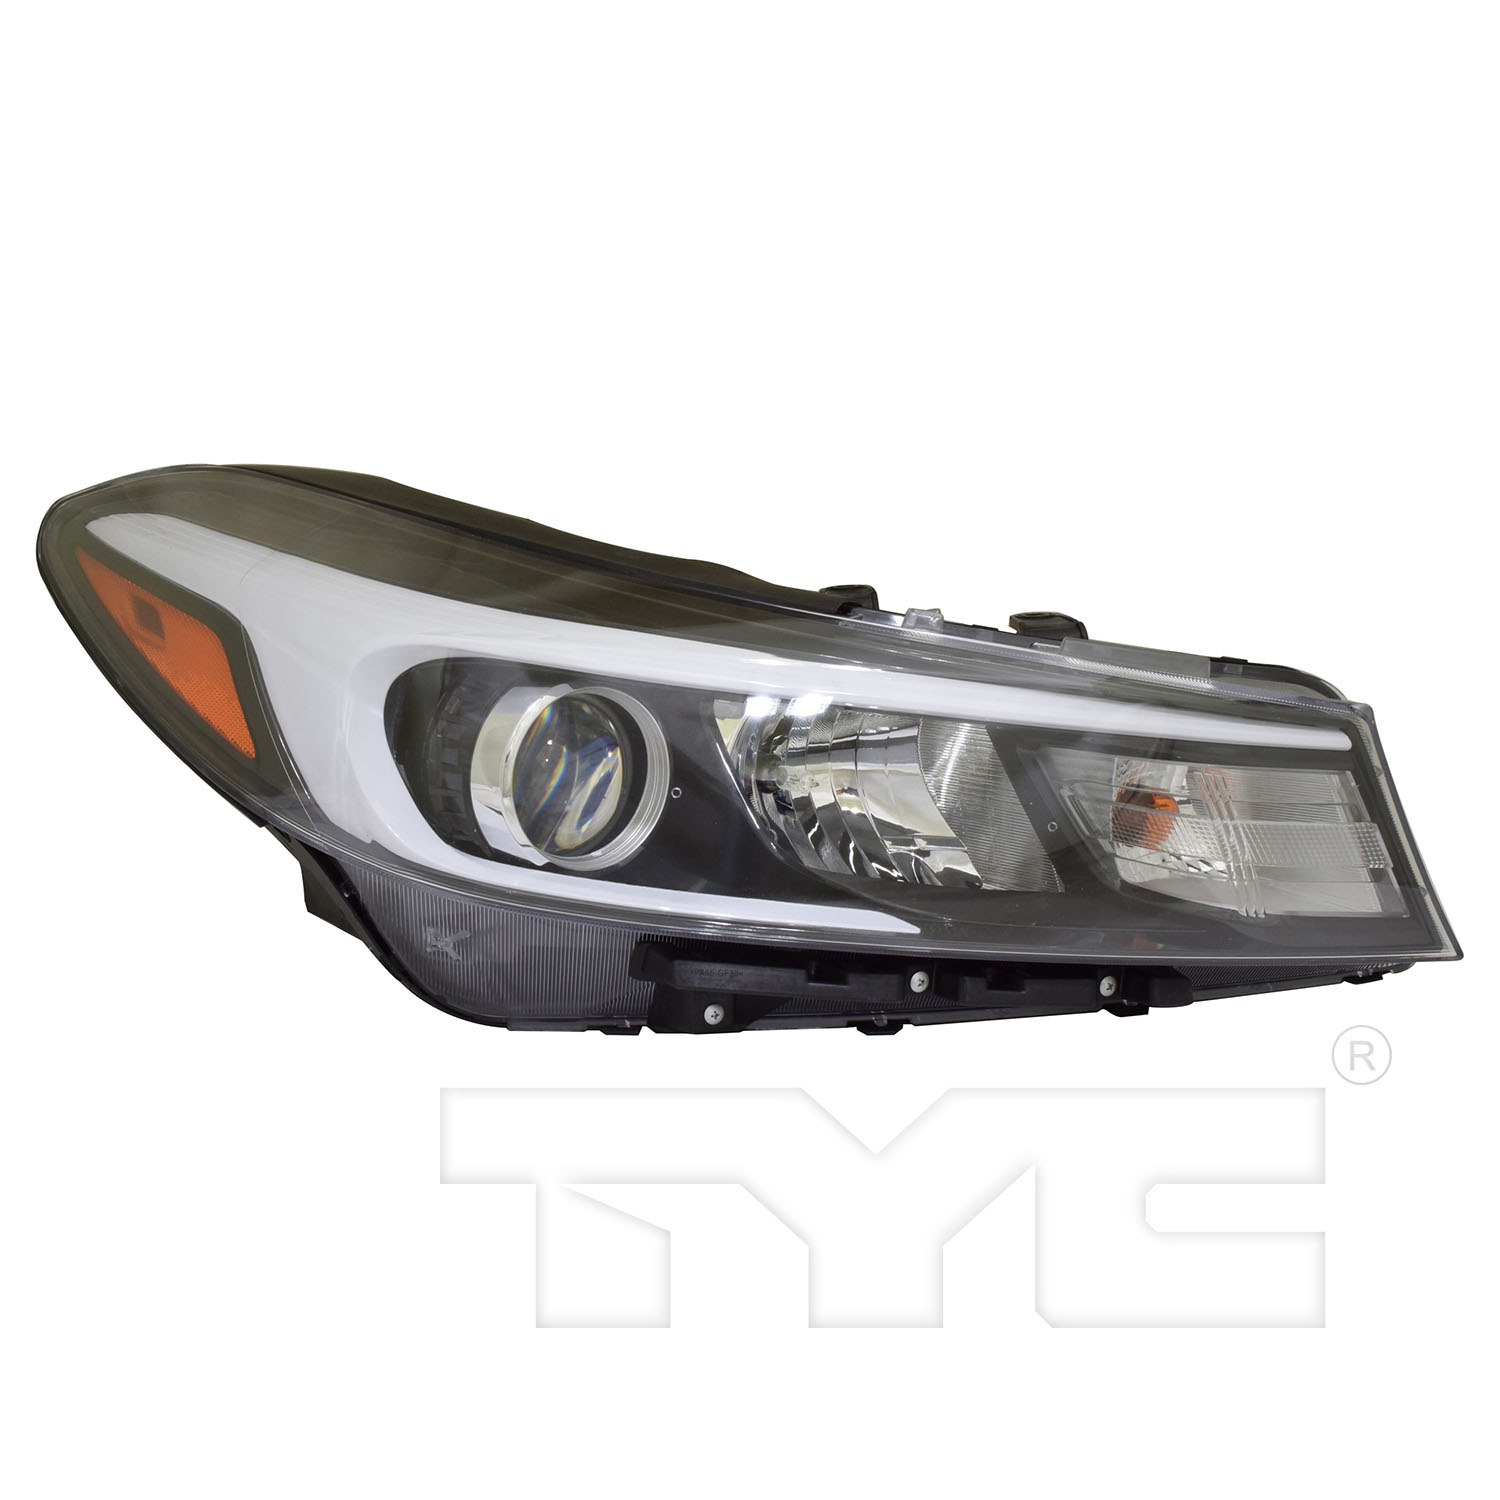 Aftermarket HEADLIGHTS for KIA - FORTE, FORTE,17-18,RT Headlamp assy composite